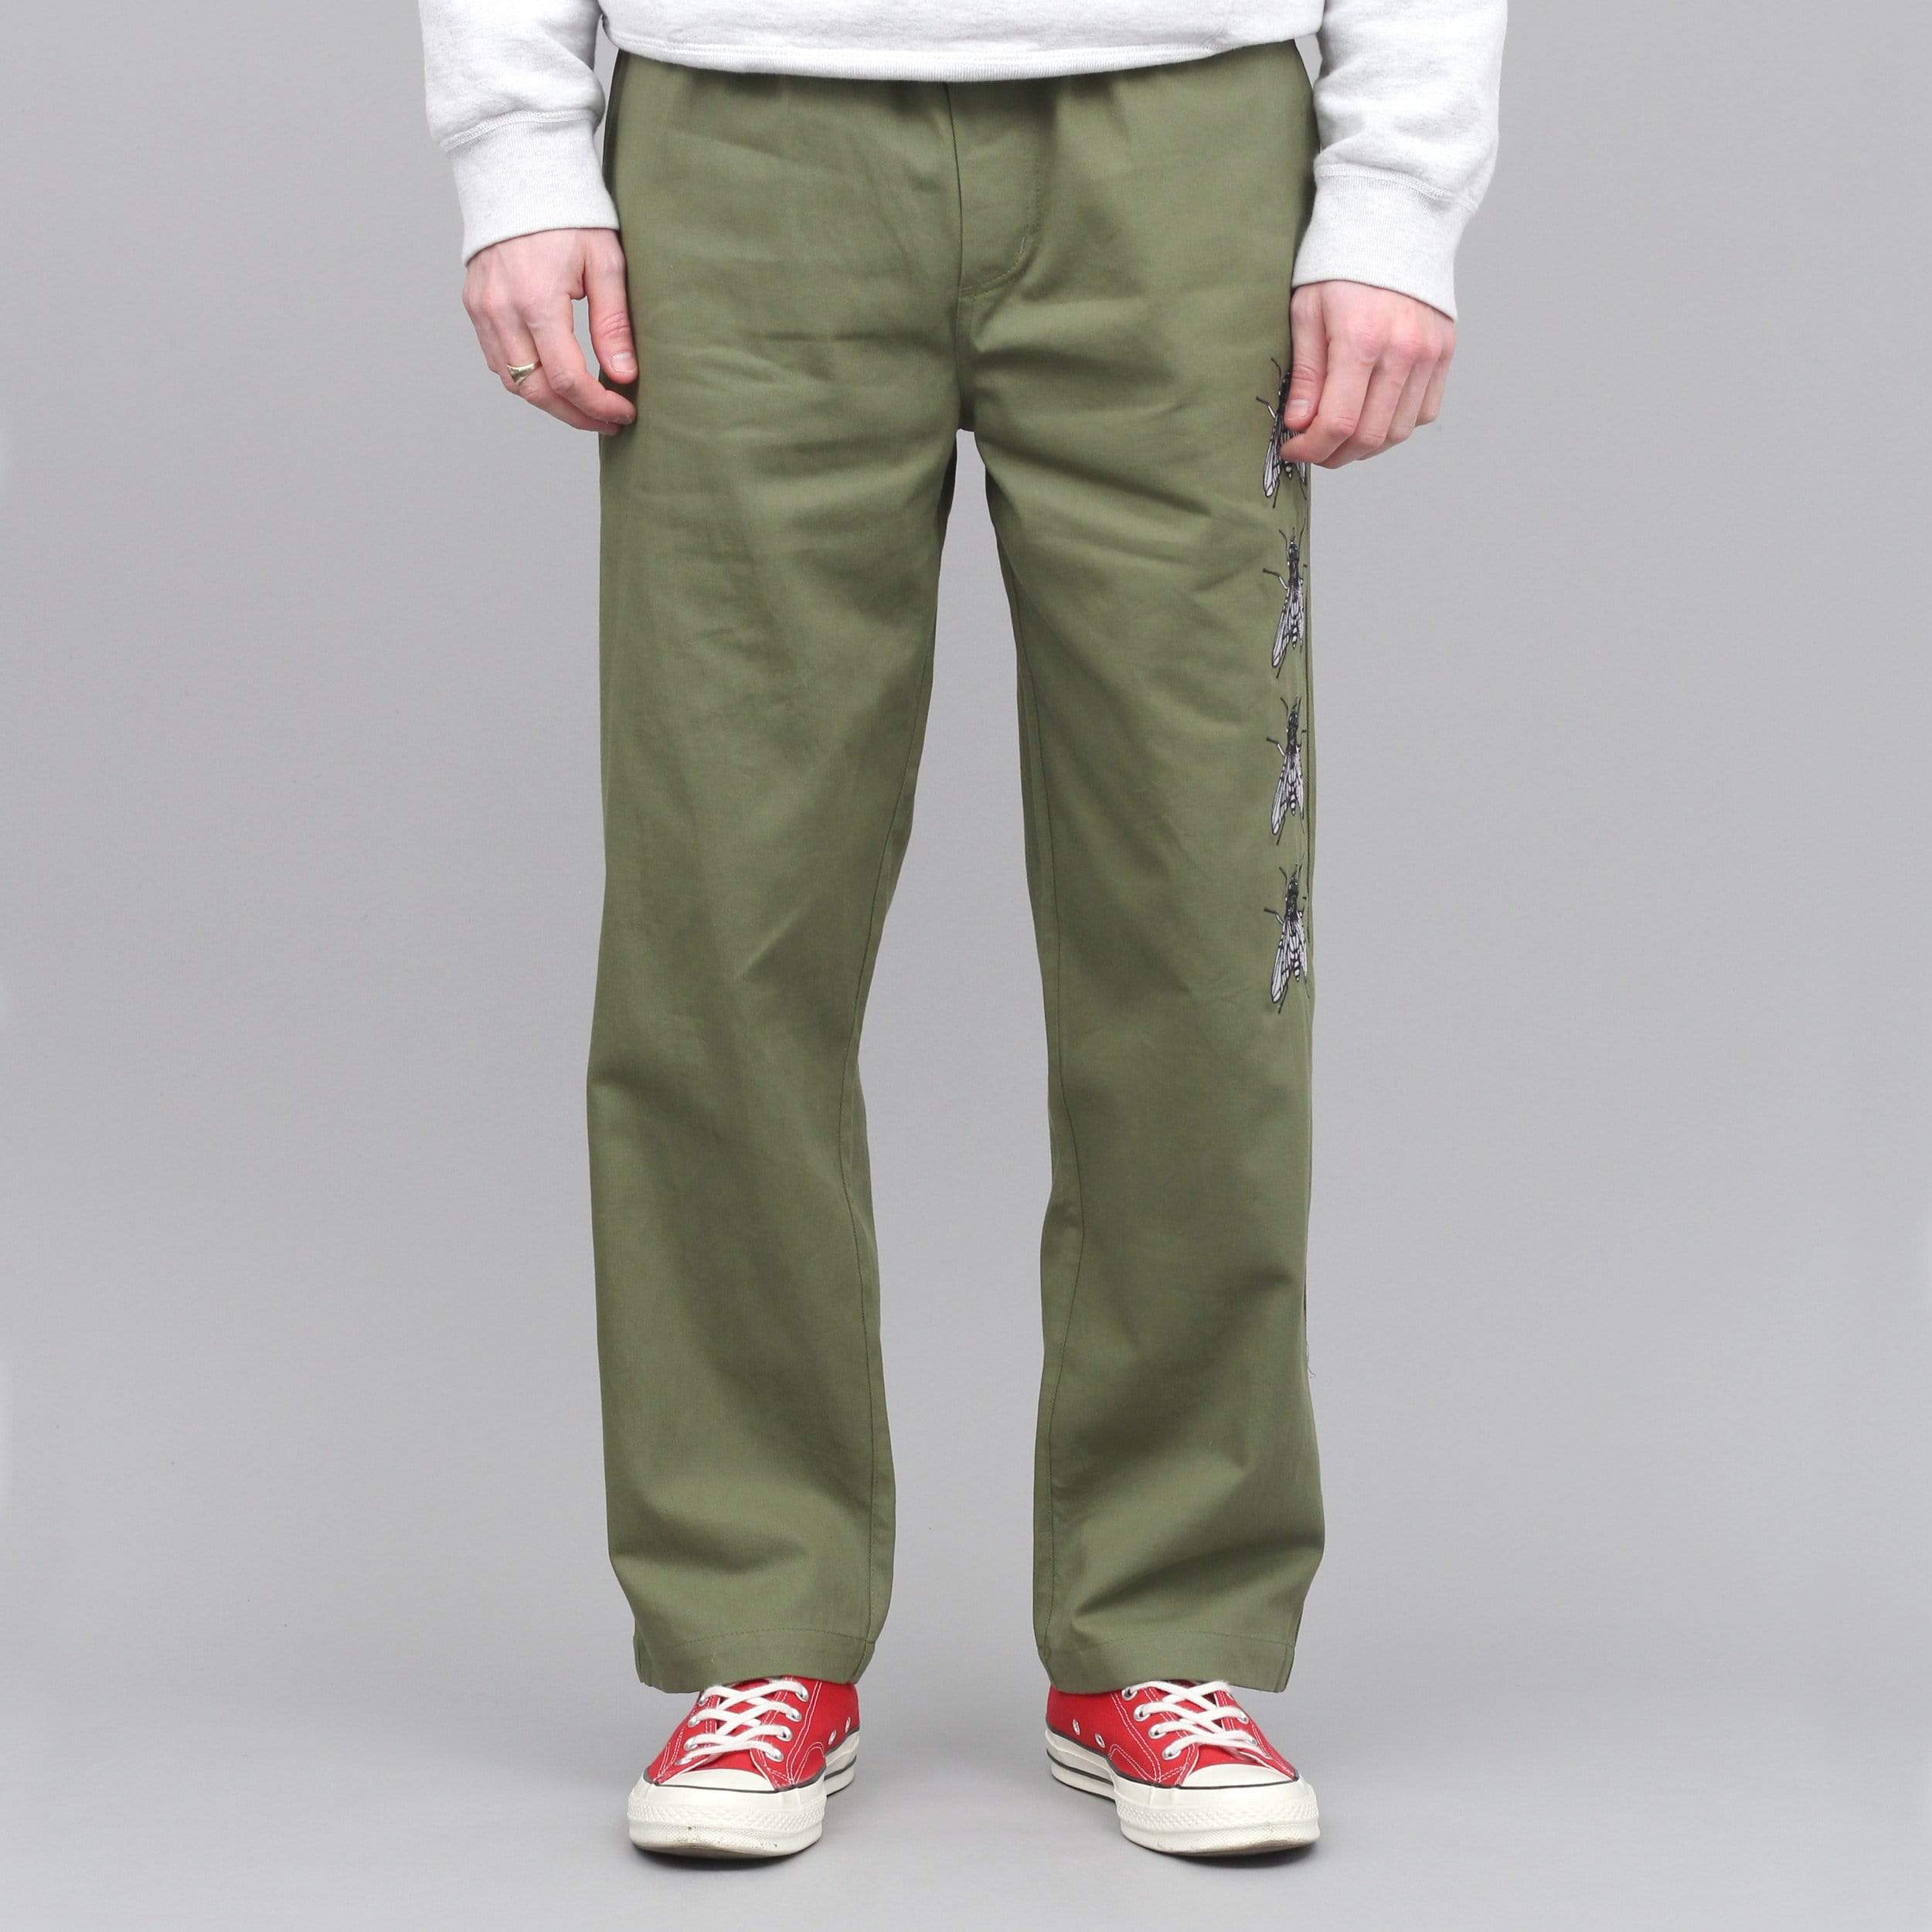 BUTTER GOODS Swarm Embroiderd Pants